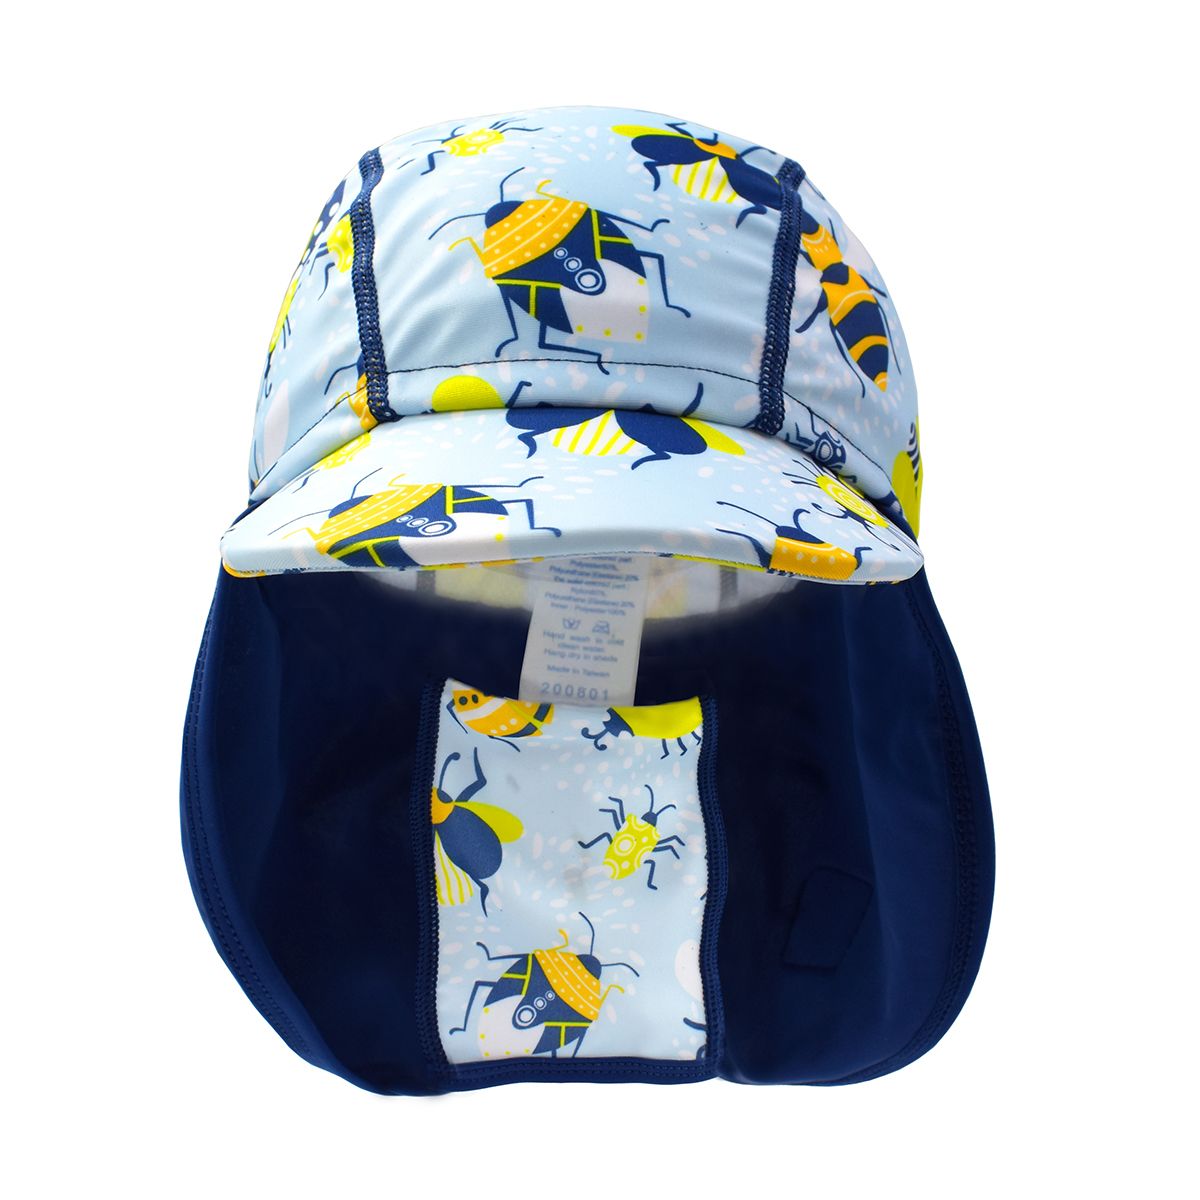 Legionnaire style sun hat in light blue and navy blue, with insects themed print panel. Front.